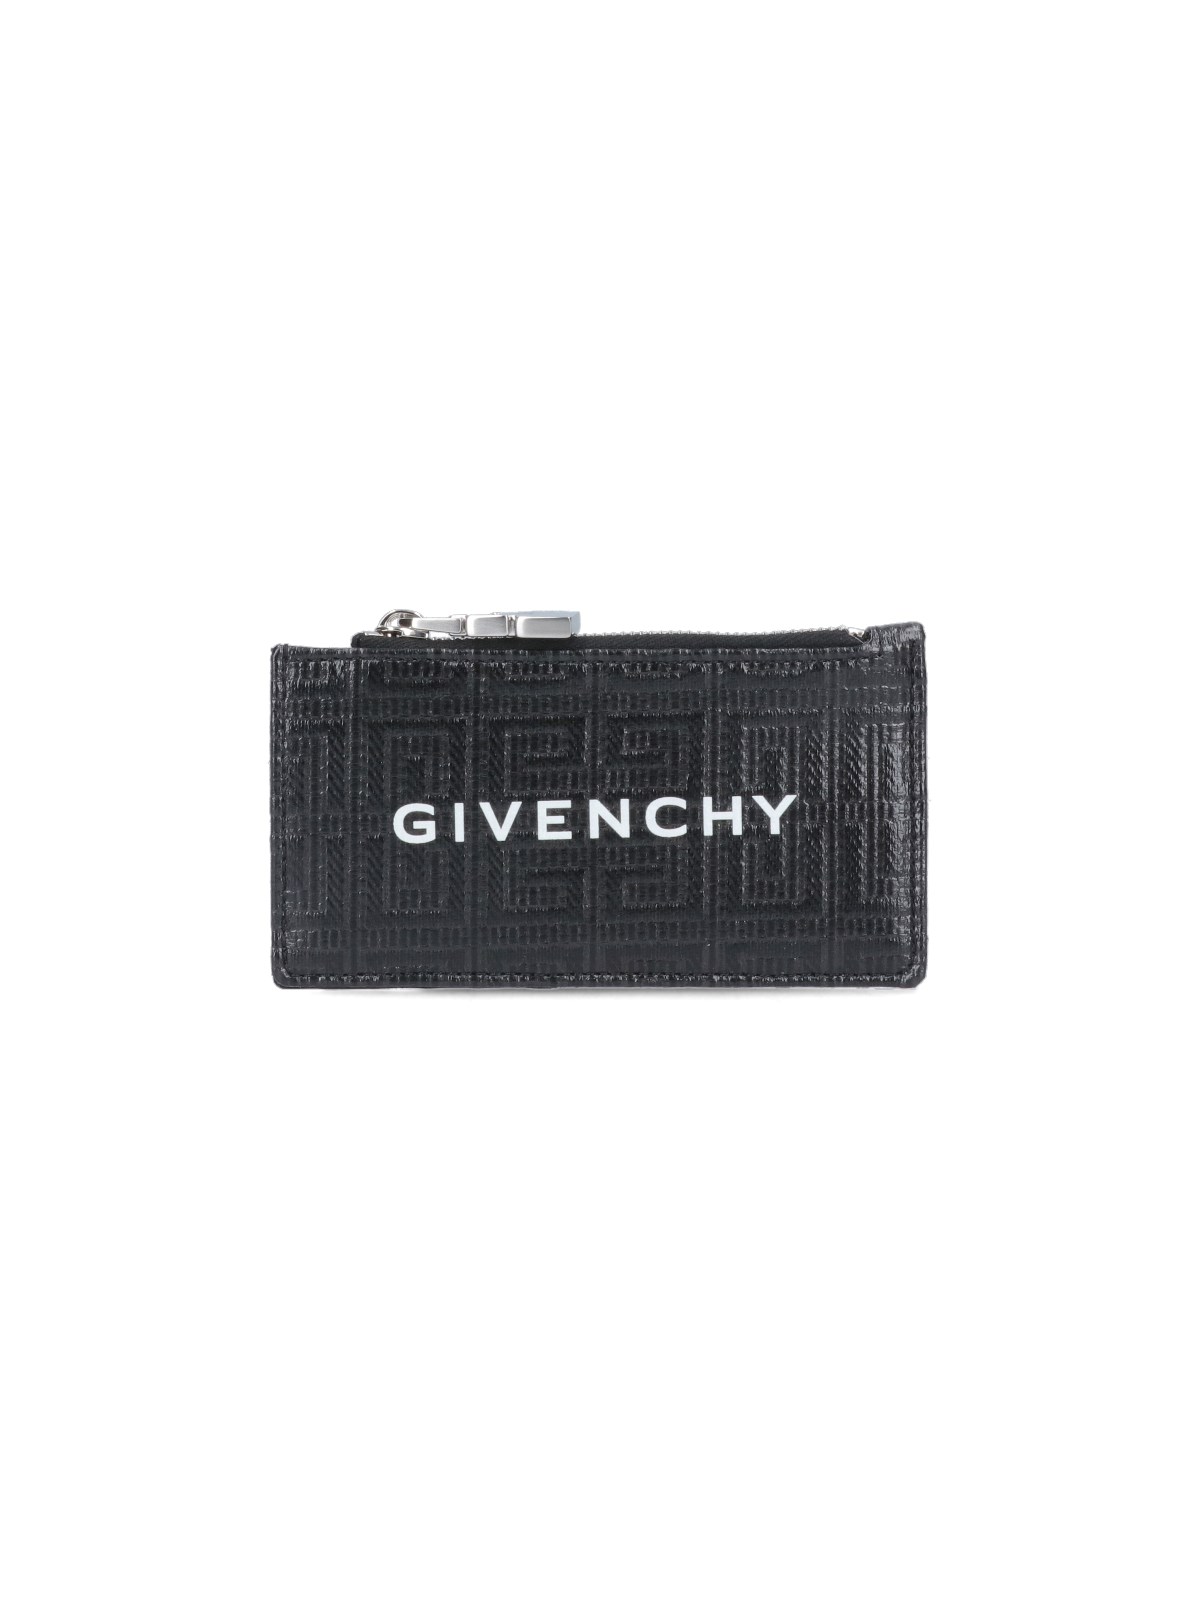 Givenchy '4g' Zip Card Holder In Nero | ModeSens